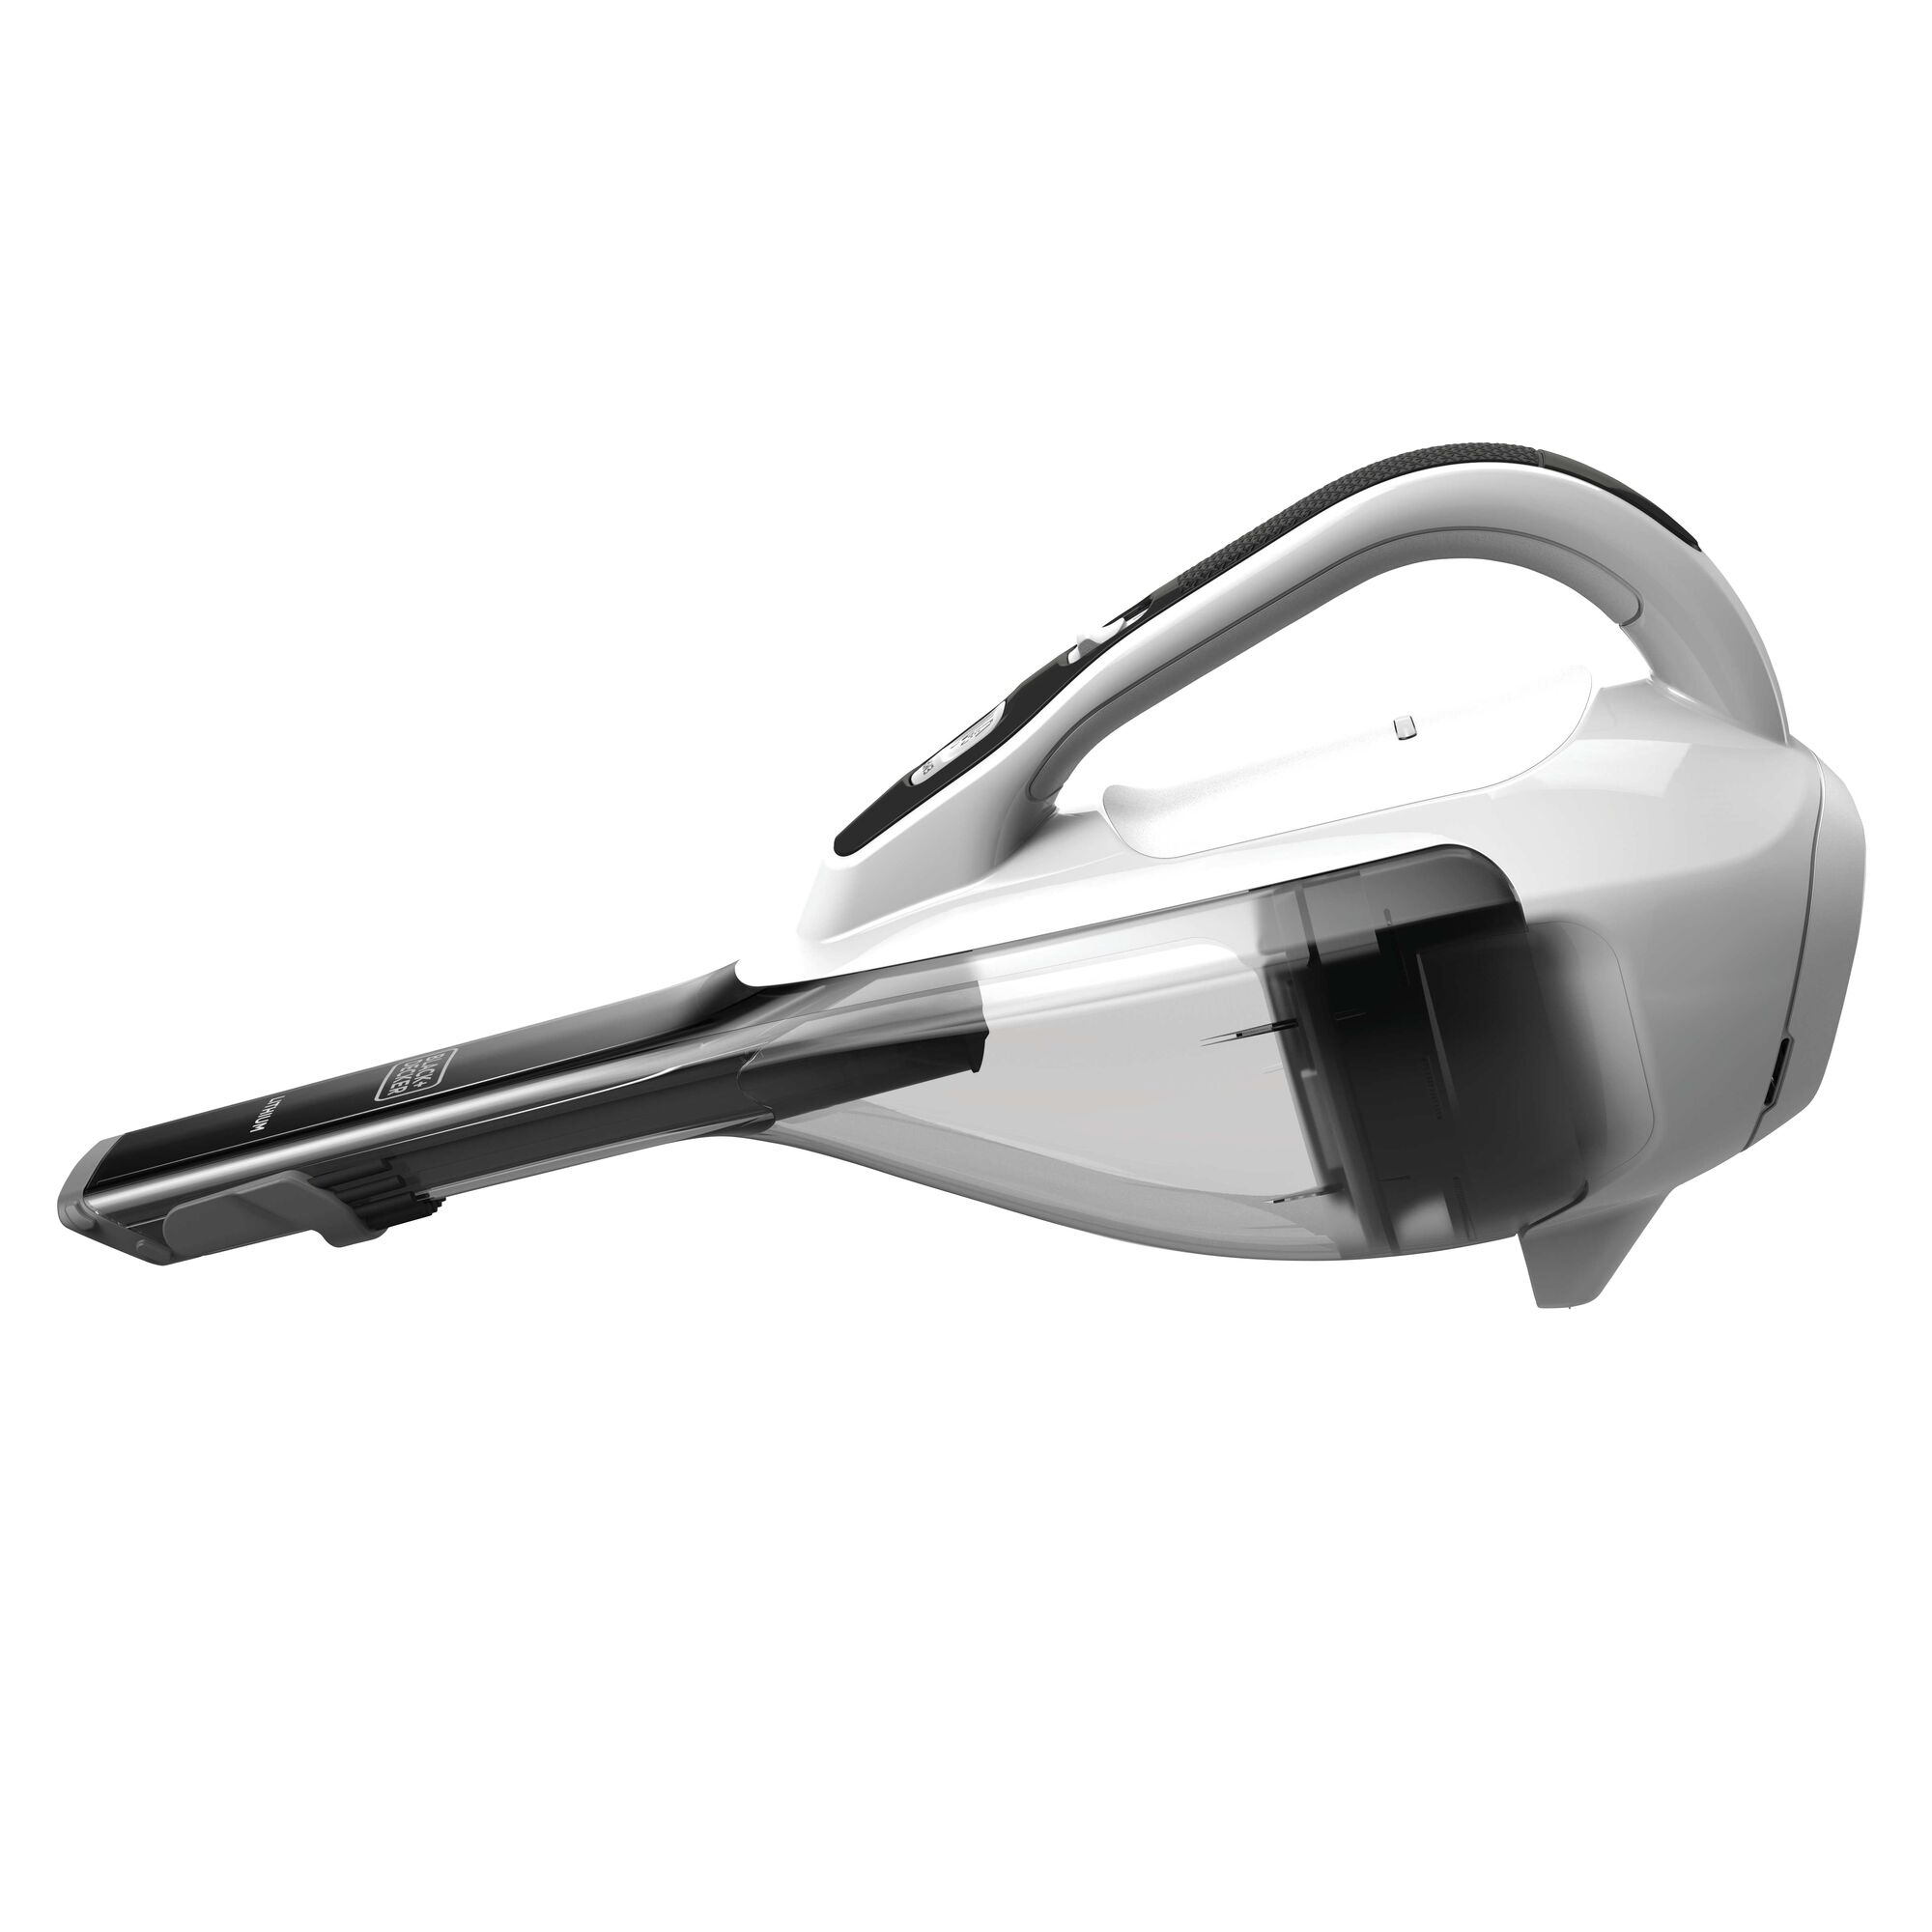 Dustbuster advanced clean cordless hand vacuum with scented filter.\n